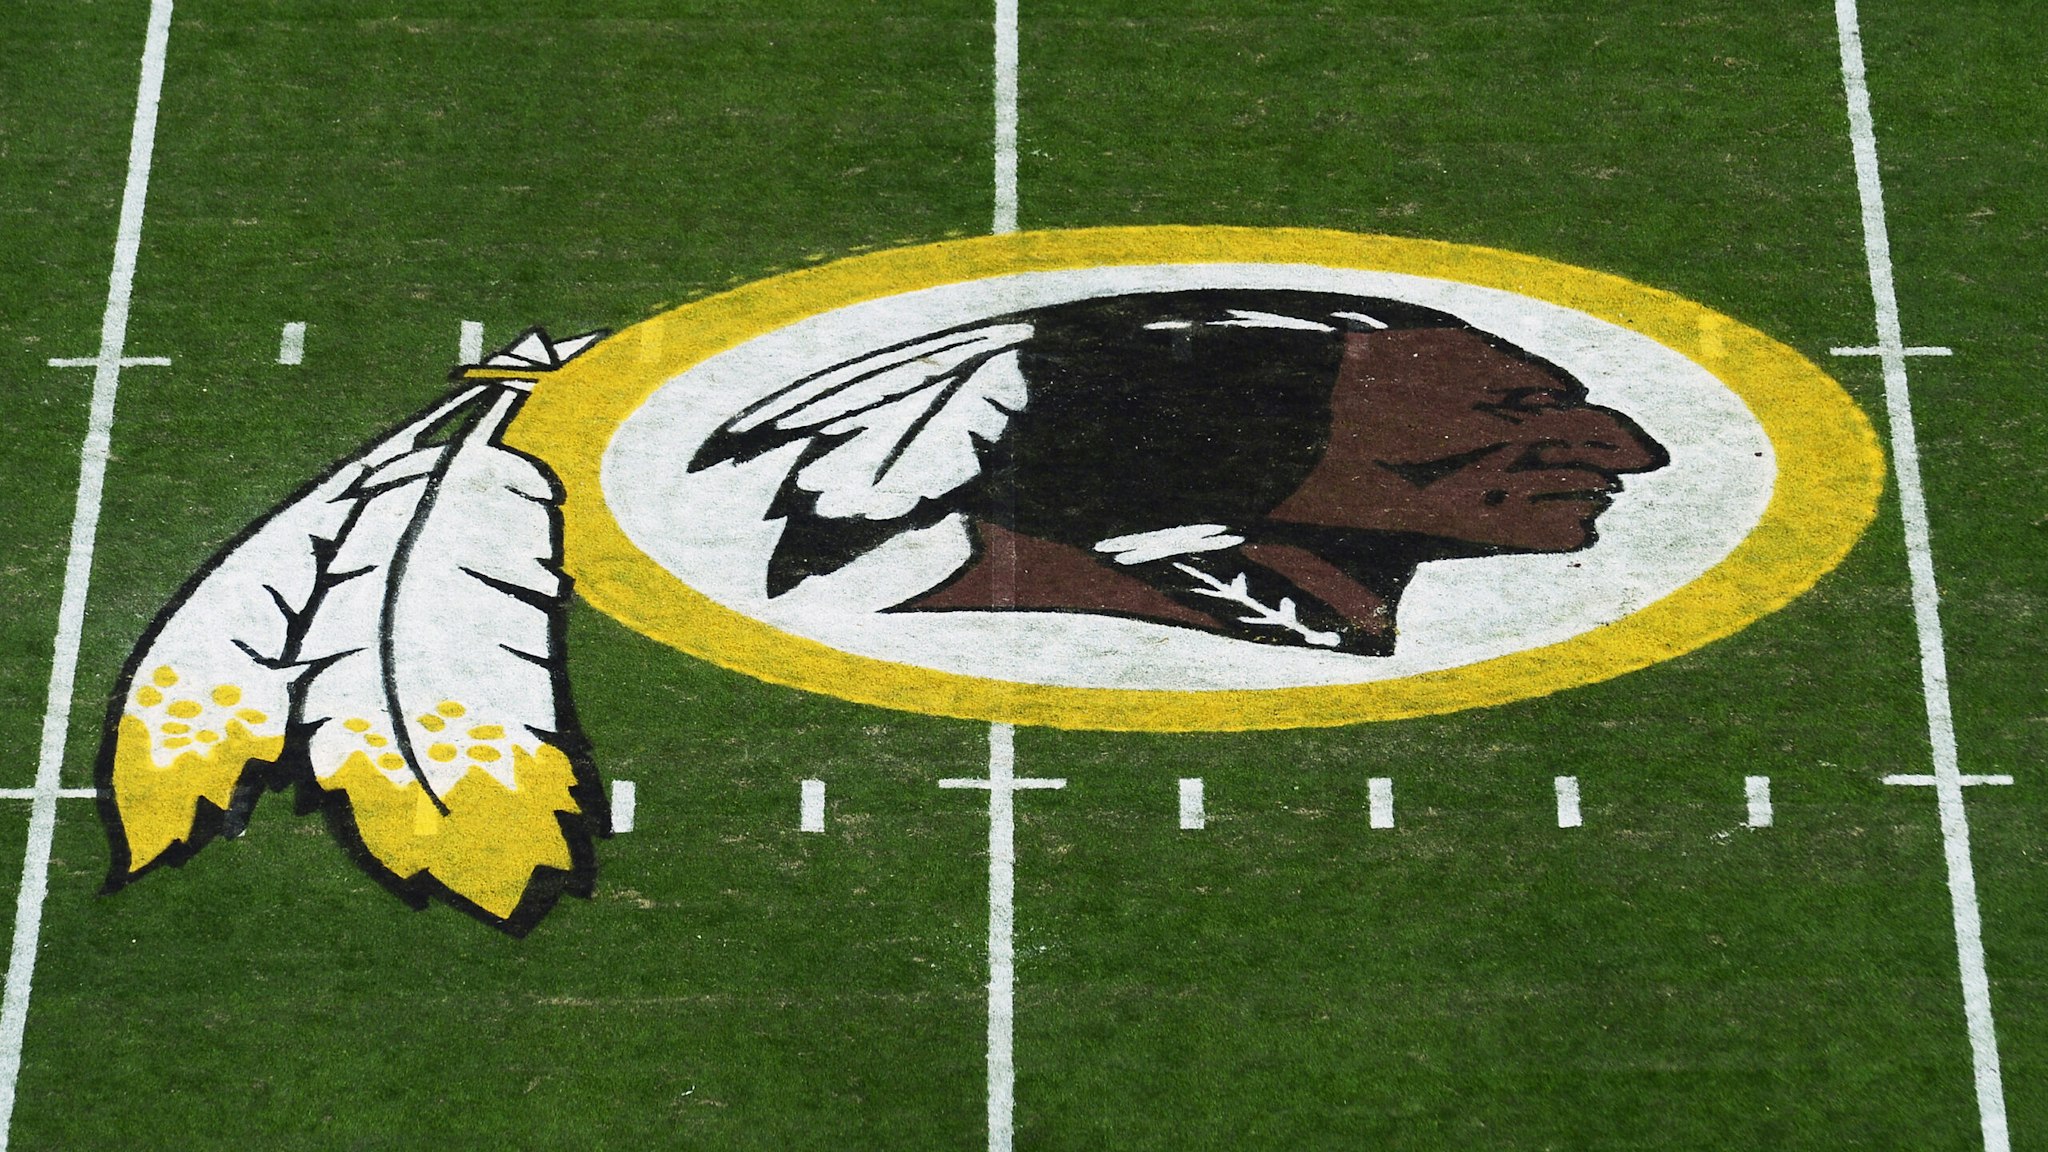 LANDOVER, MD - NOVEMBER 24: A general view of the Washington Redskins logo at center field before a game between the Detroit Lions and Redskins at FedExField on November 24, 2019 in Landover, Maryland. (Photo by Patrick McDermott/Getty Images)